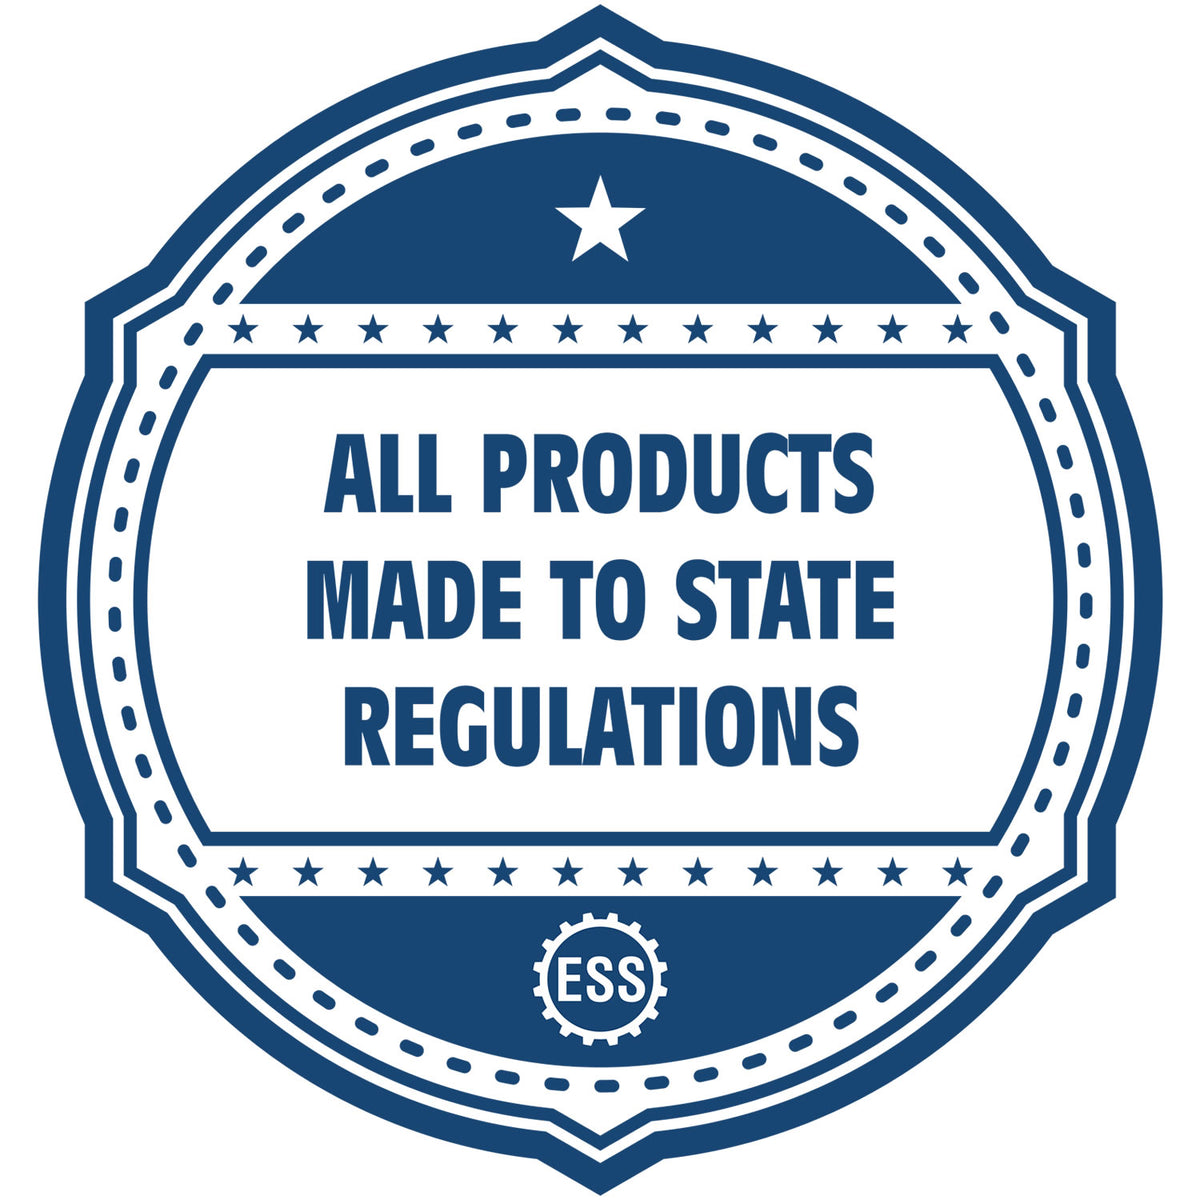 An icon or badge element for the Long Reach Massachusetts PE Seal showing that this product is made in compliance with state regulations.